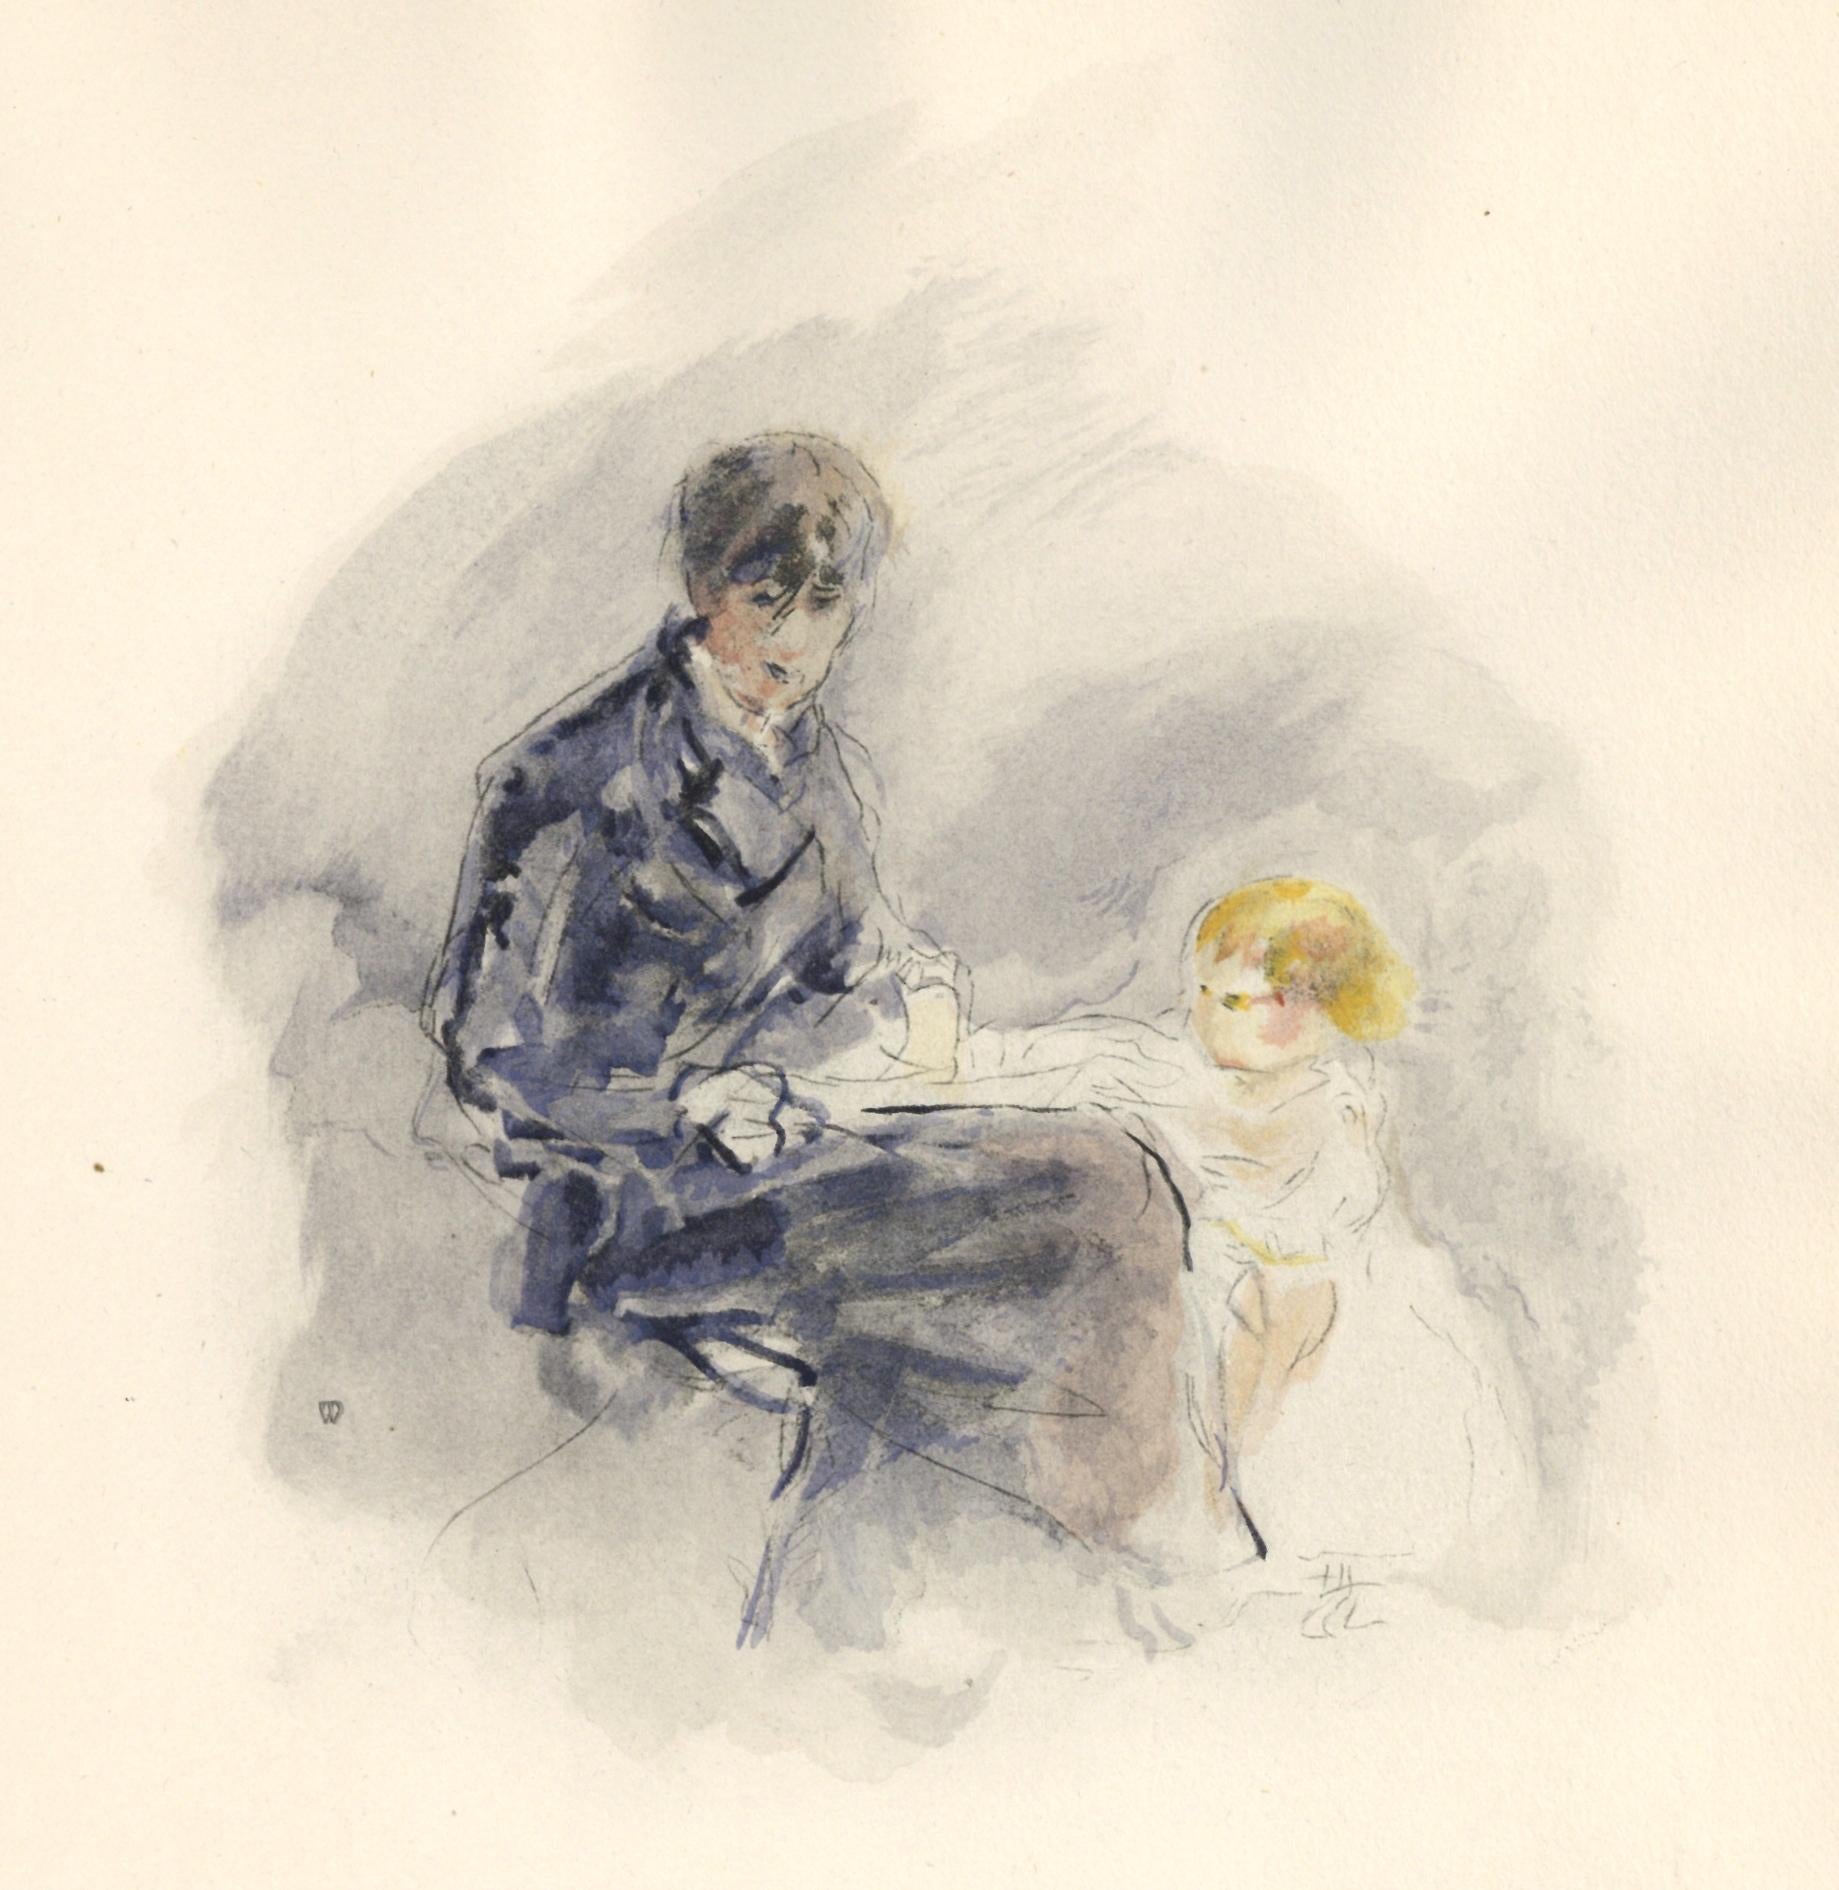 Medium: pochoir (after the 1880 watercolor). Printed 1946 in a limited edition of 300 for the rare "Berthe Morisot Seize Aquarelles" portfolio, published in Paris by Quatre Chemins. The image measures 7 x 6 1/4 inches (185 x 160 mm). The total sheet